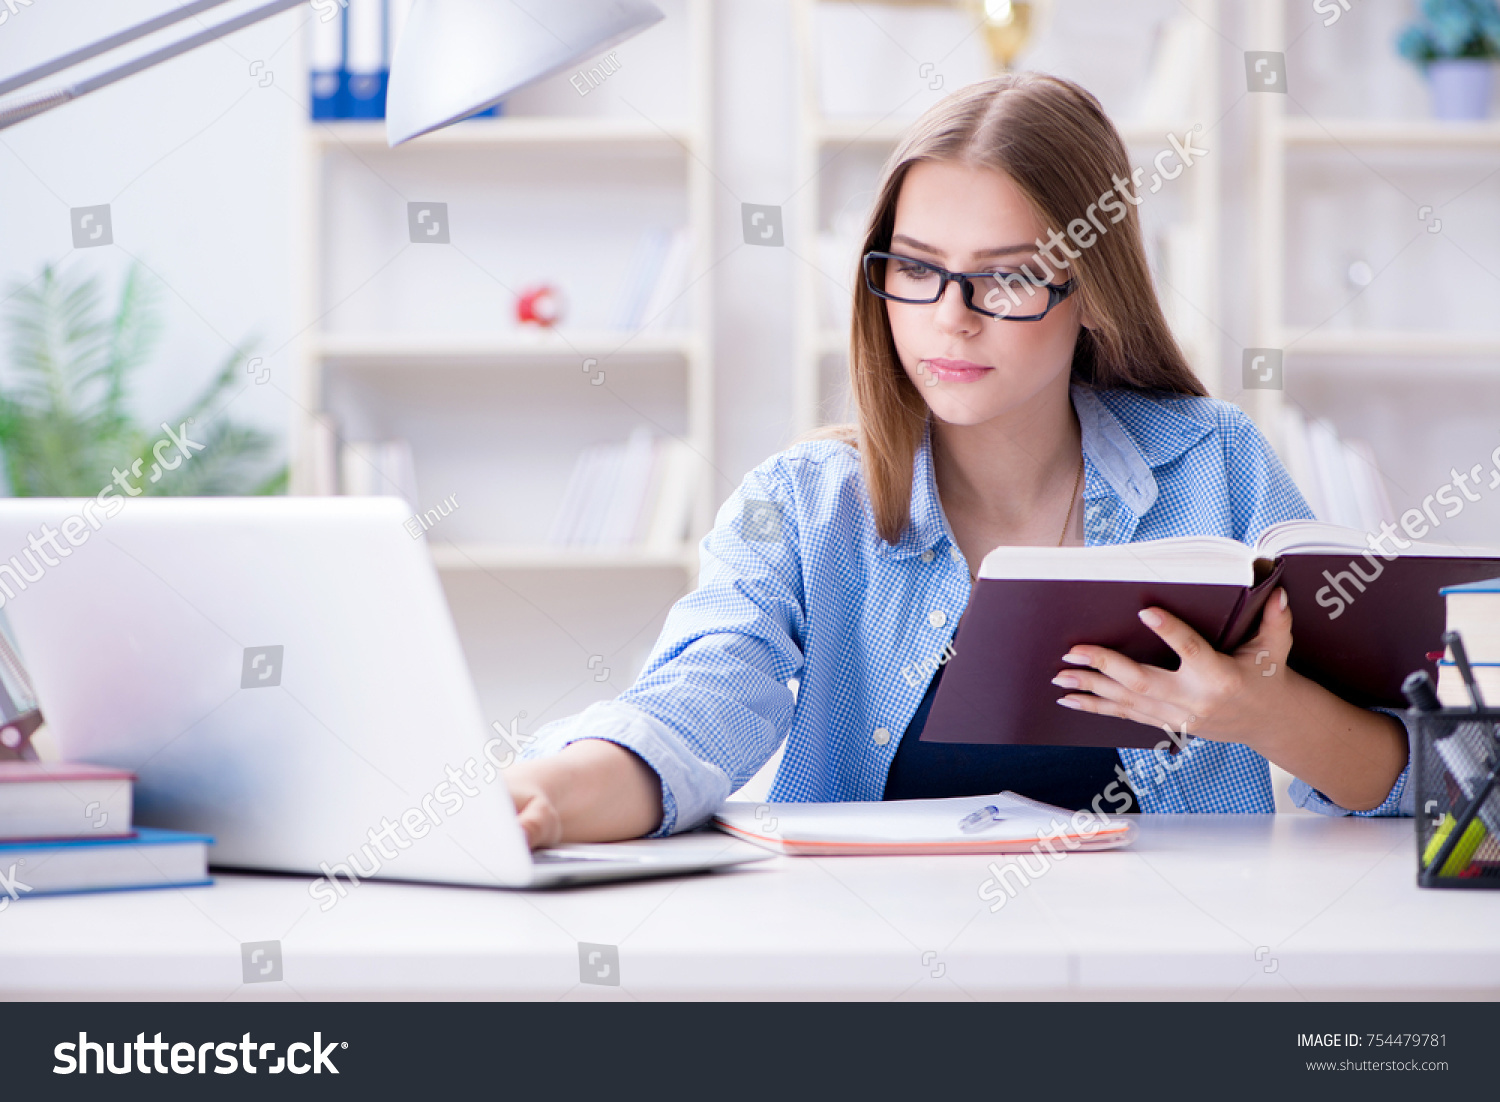 Young teenage female student preparing for exams at home #754479781